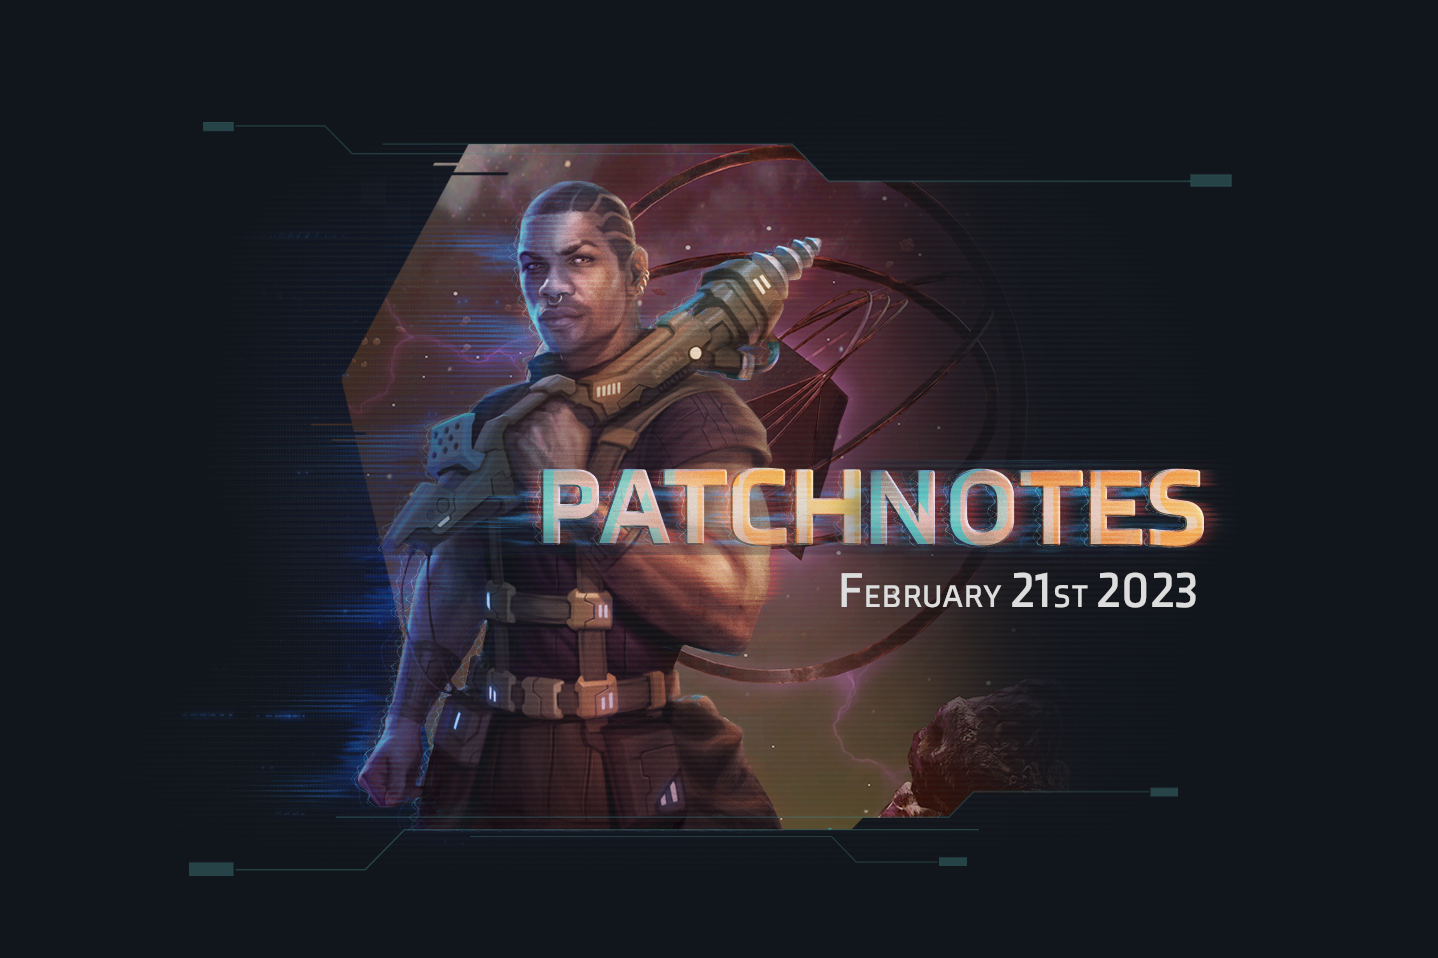 Starborne: Frontiers - Patch notes February 21st 2023